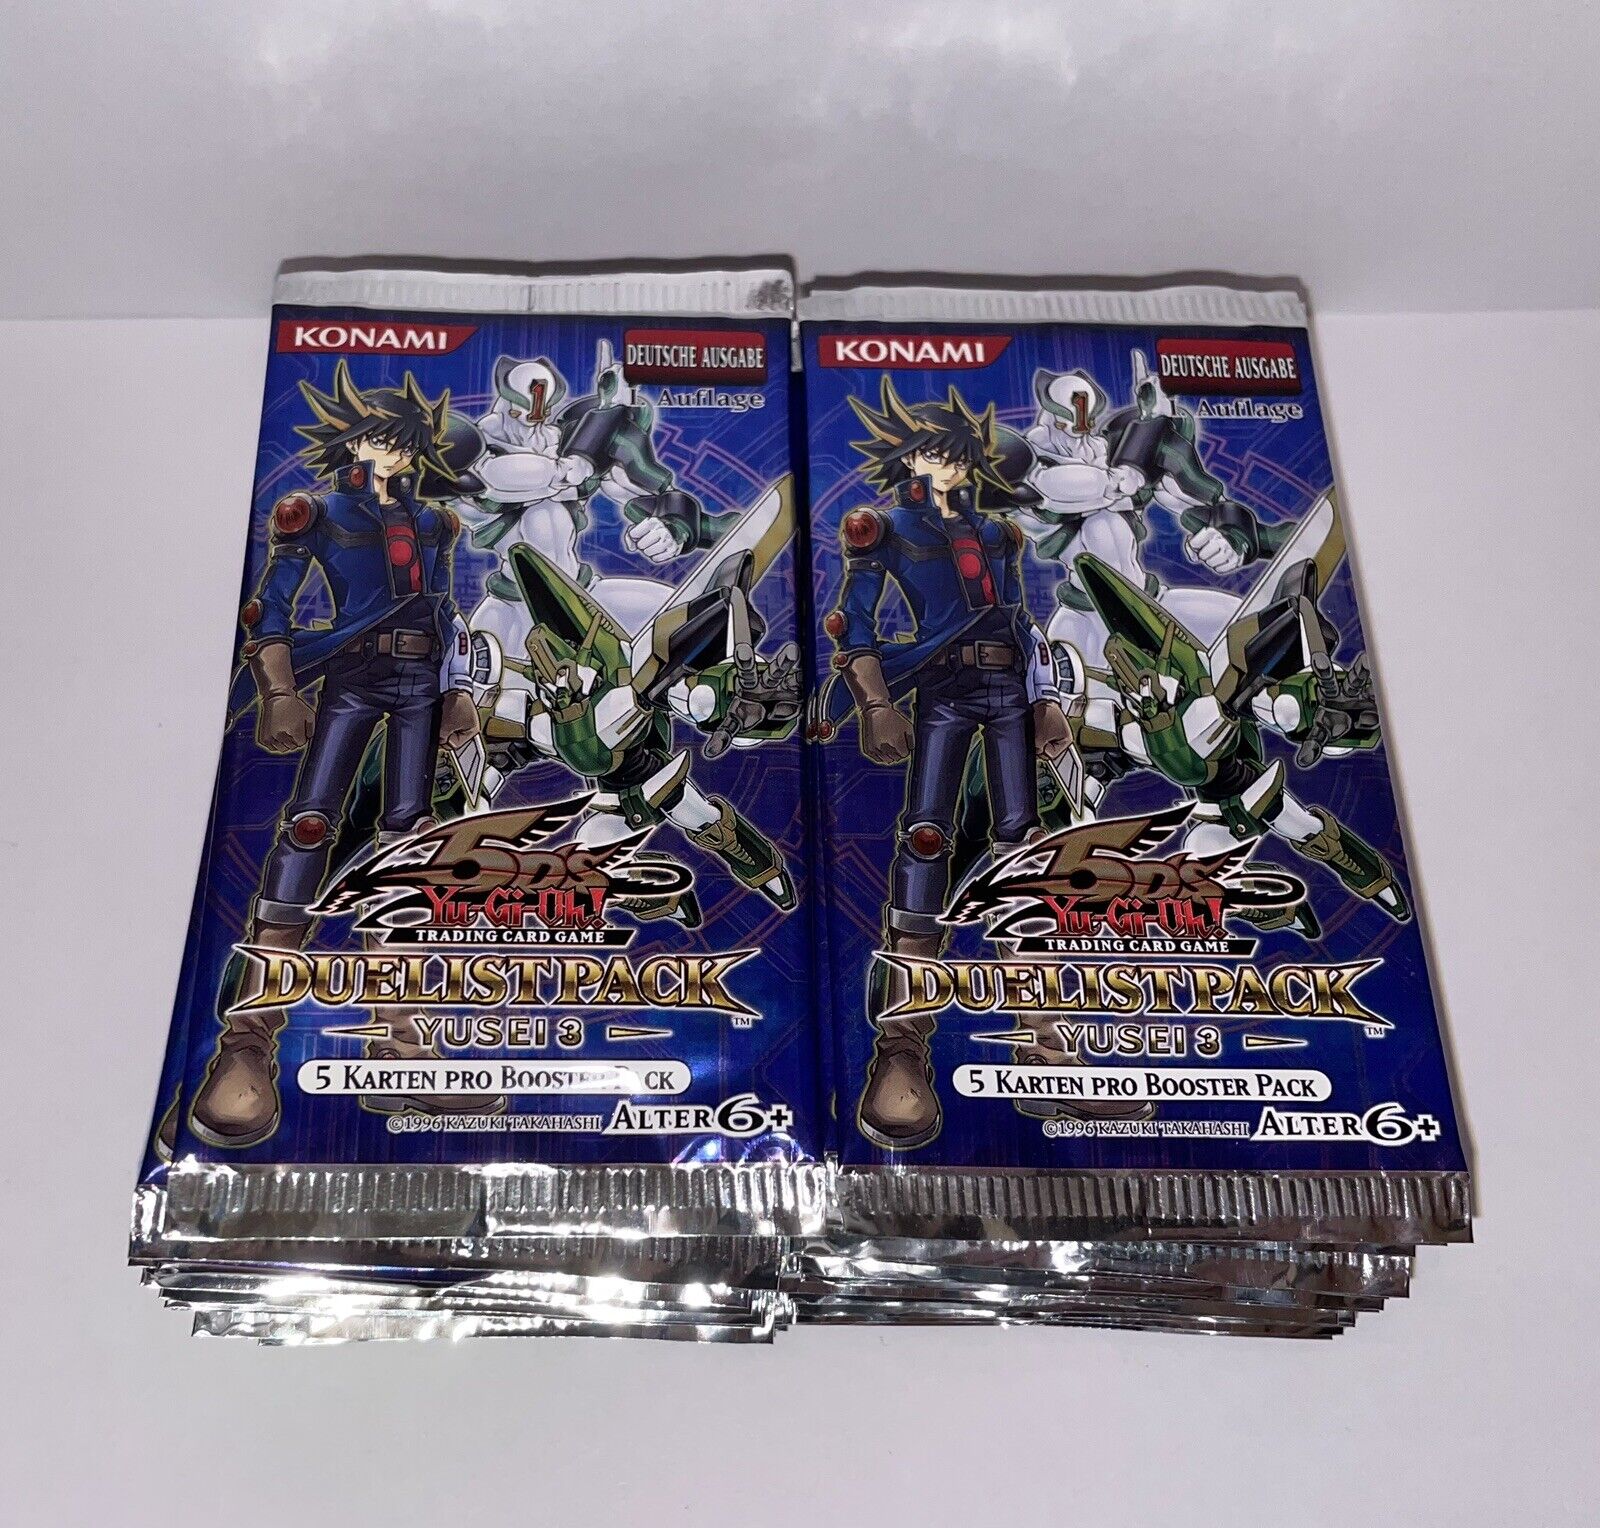 34 Piece YuGiOh Duelist Pack Yusei 3 (Original Packaging Sealed) Booster Pack 1st Edition German